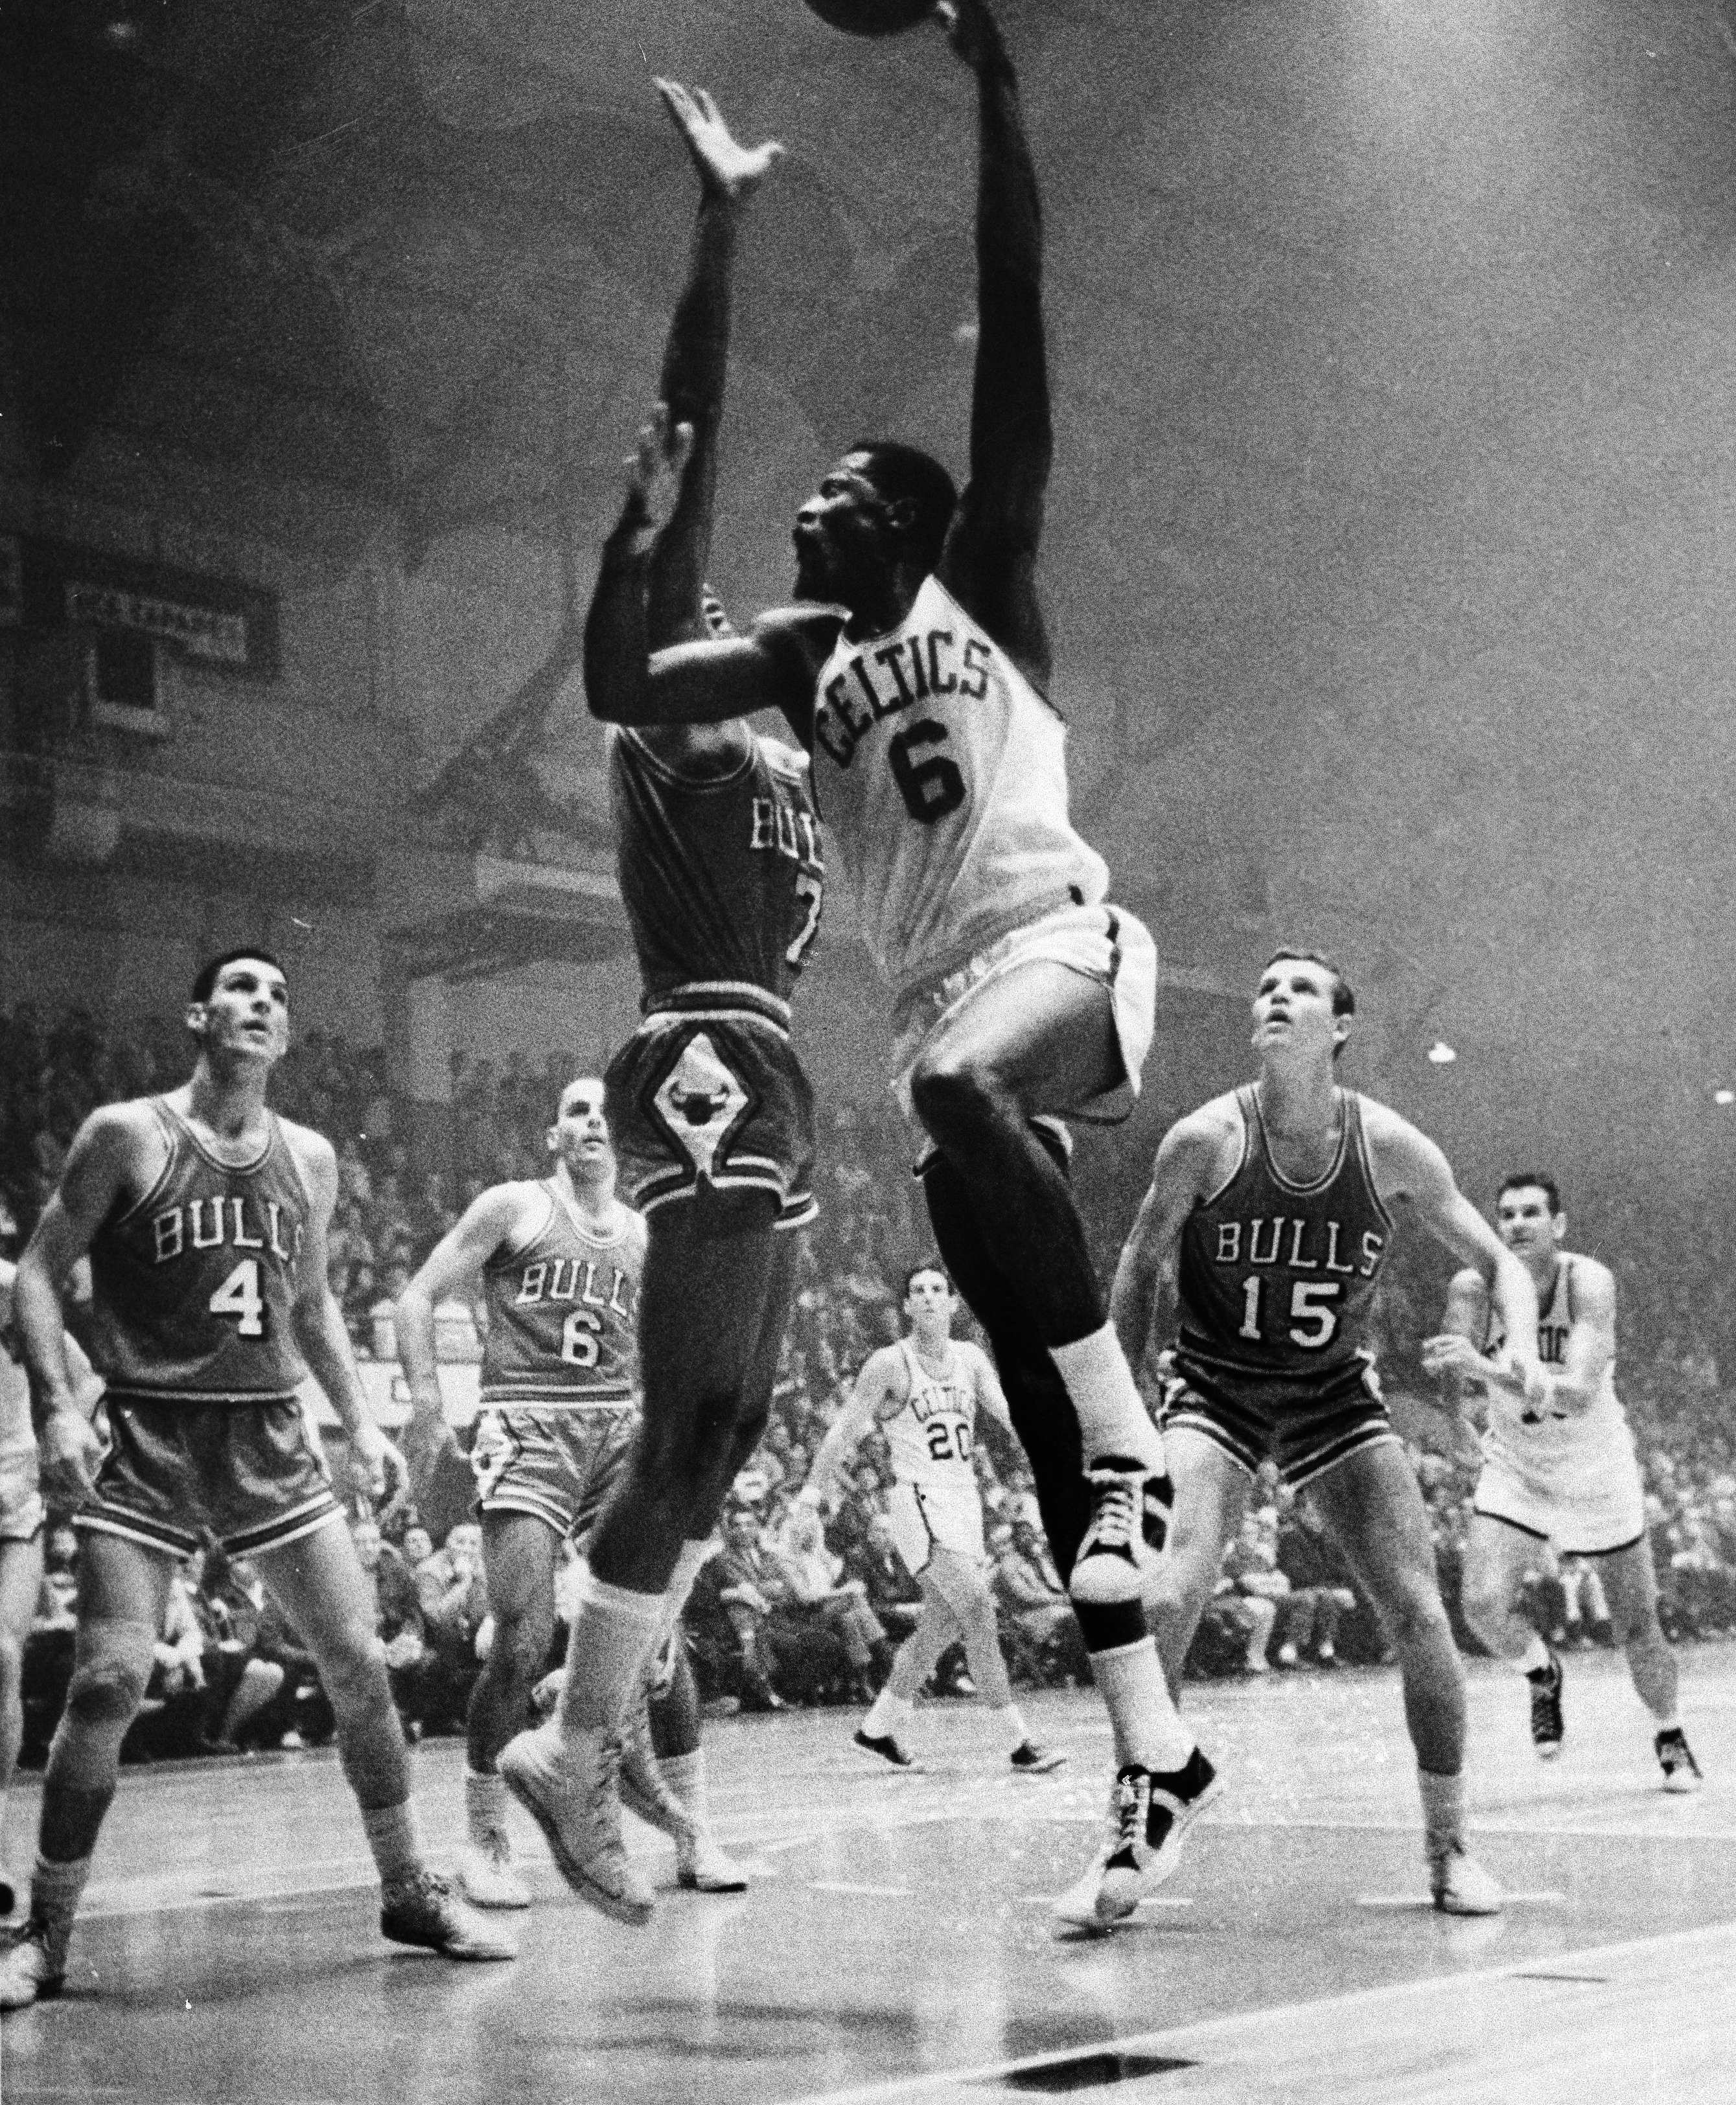 Oscar Robertson and Jerry West by Wen Roberts